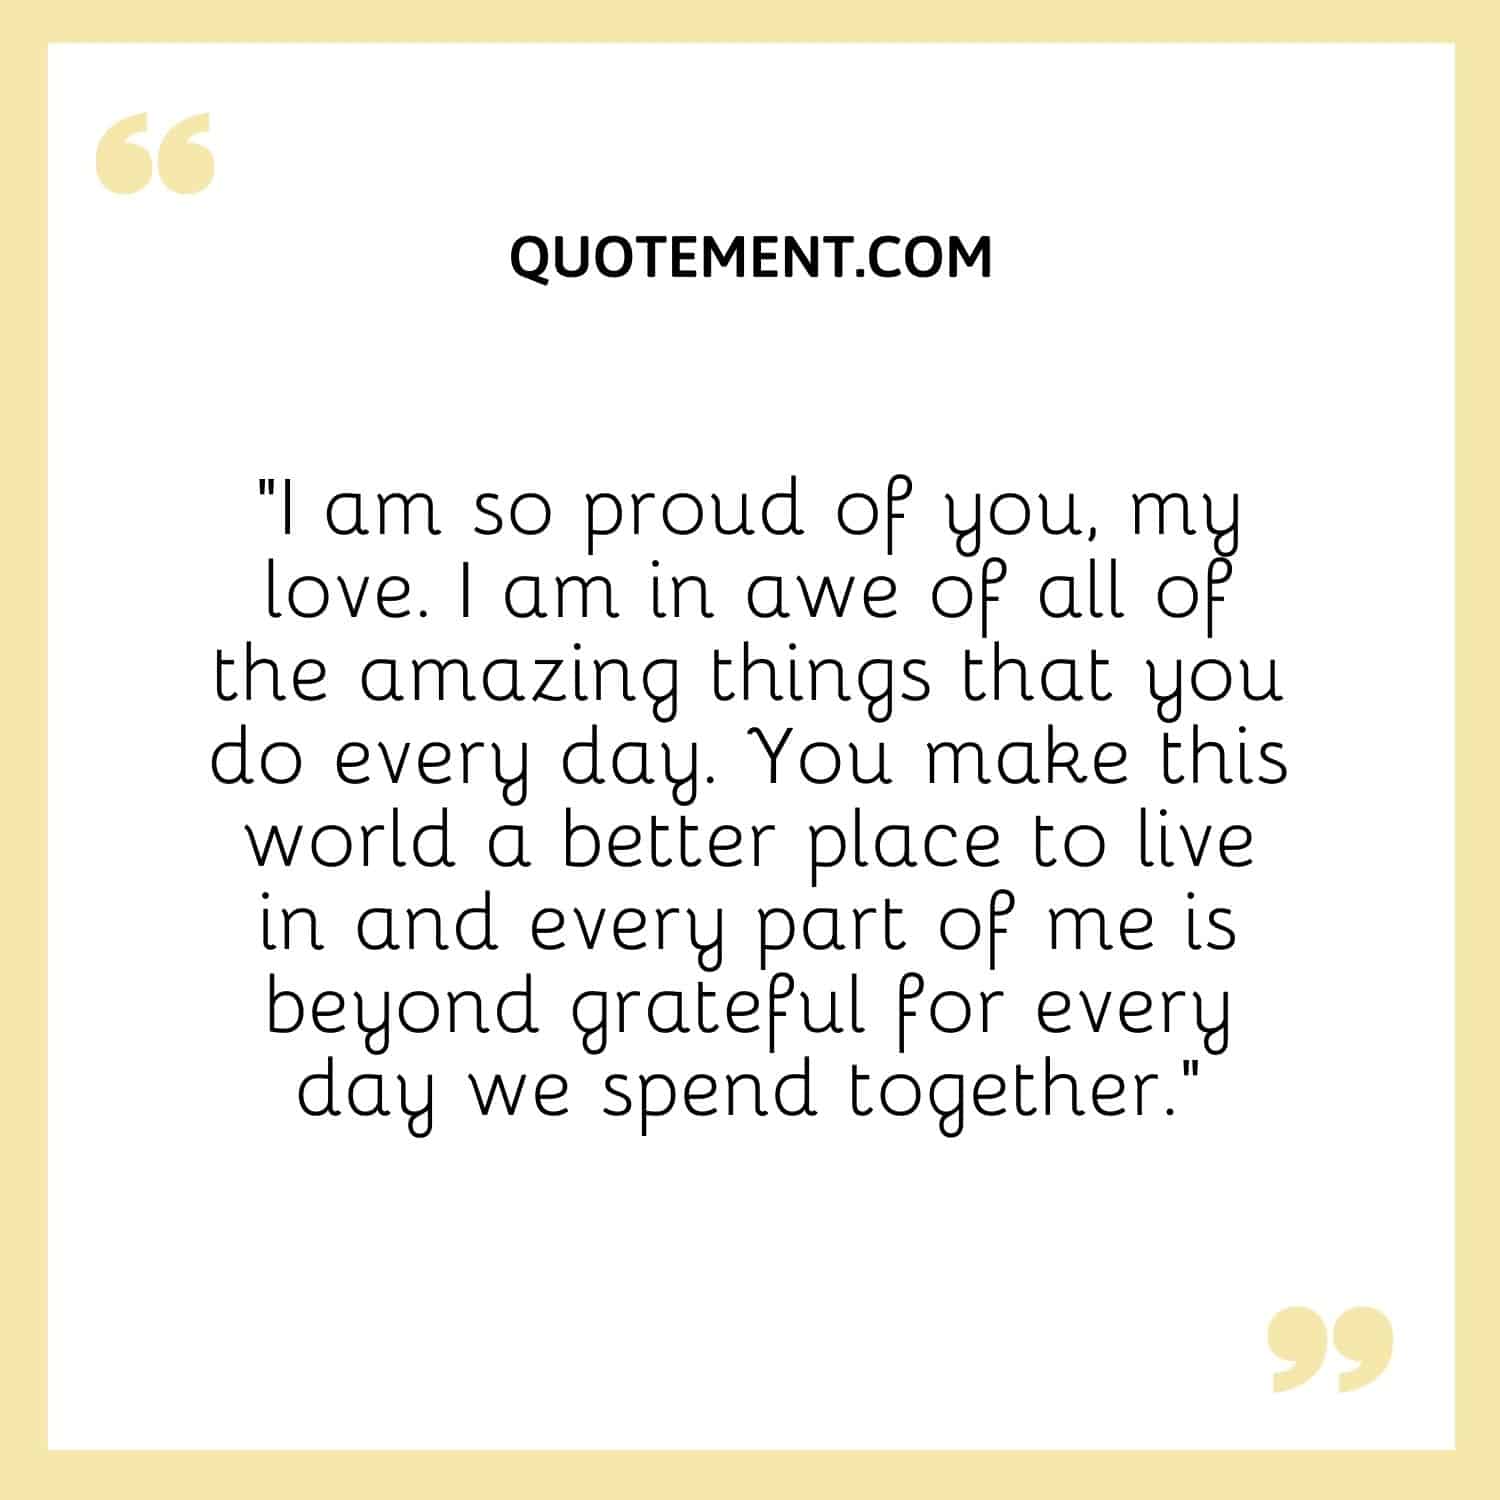 “I am so proud of you, my love. I am in awe of all of the amazing things that you do every day.